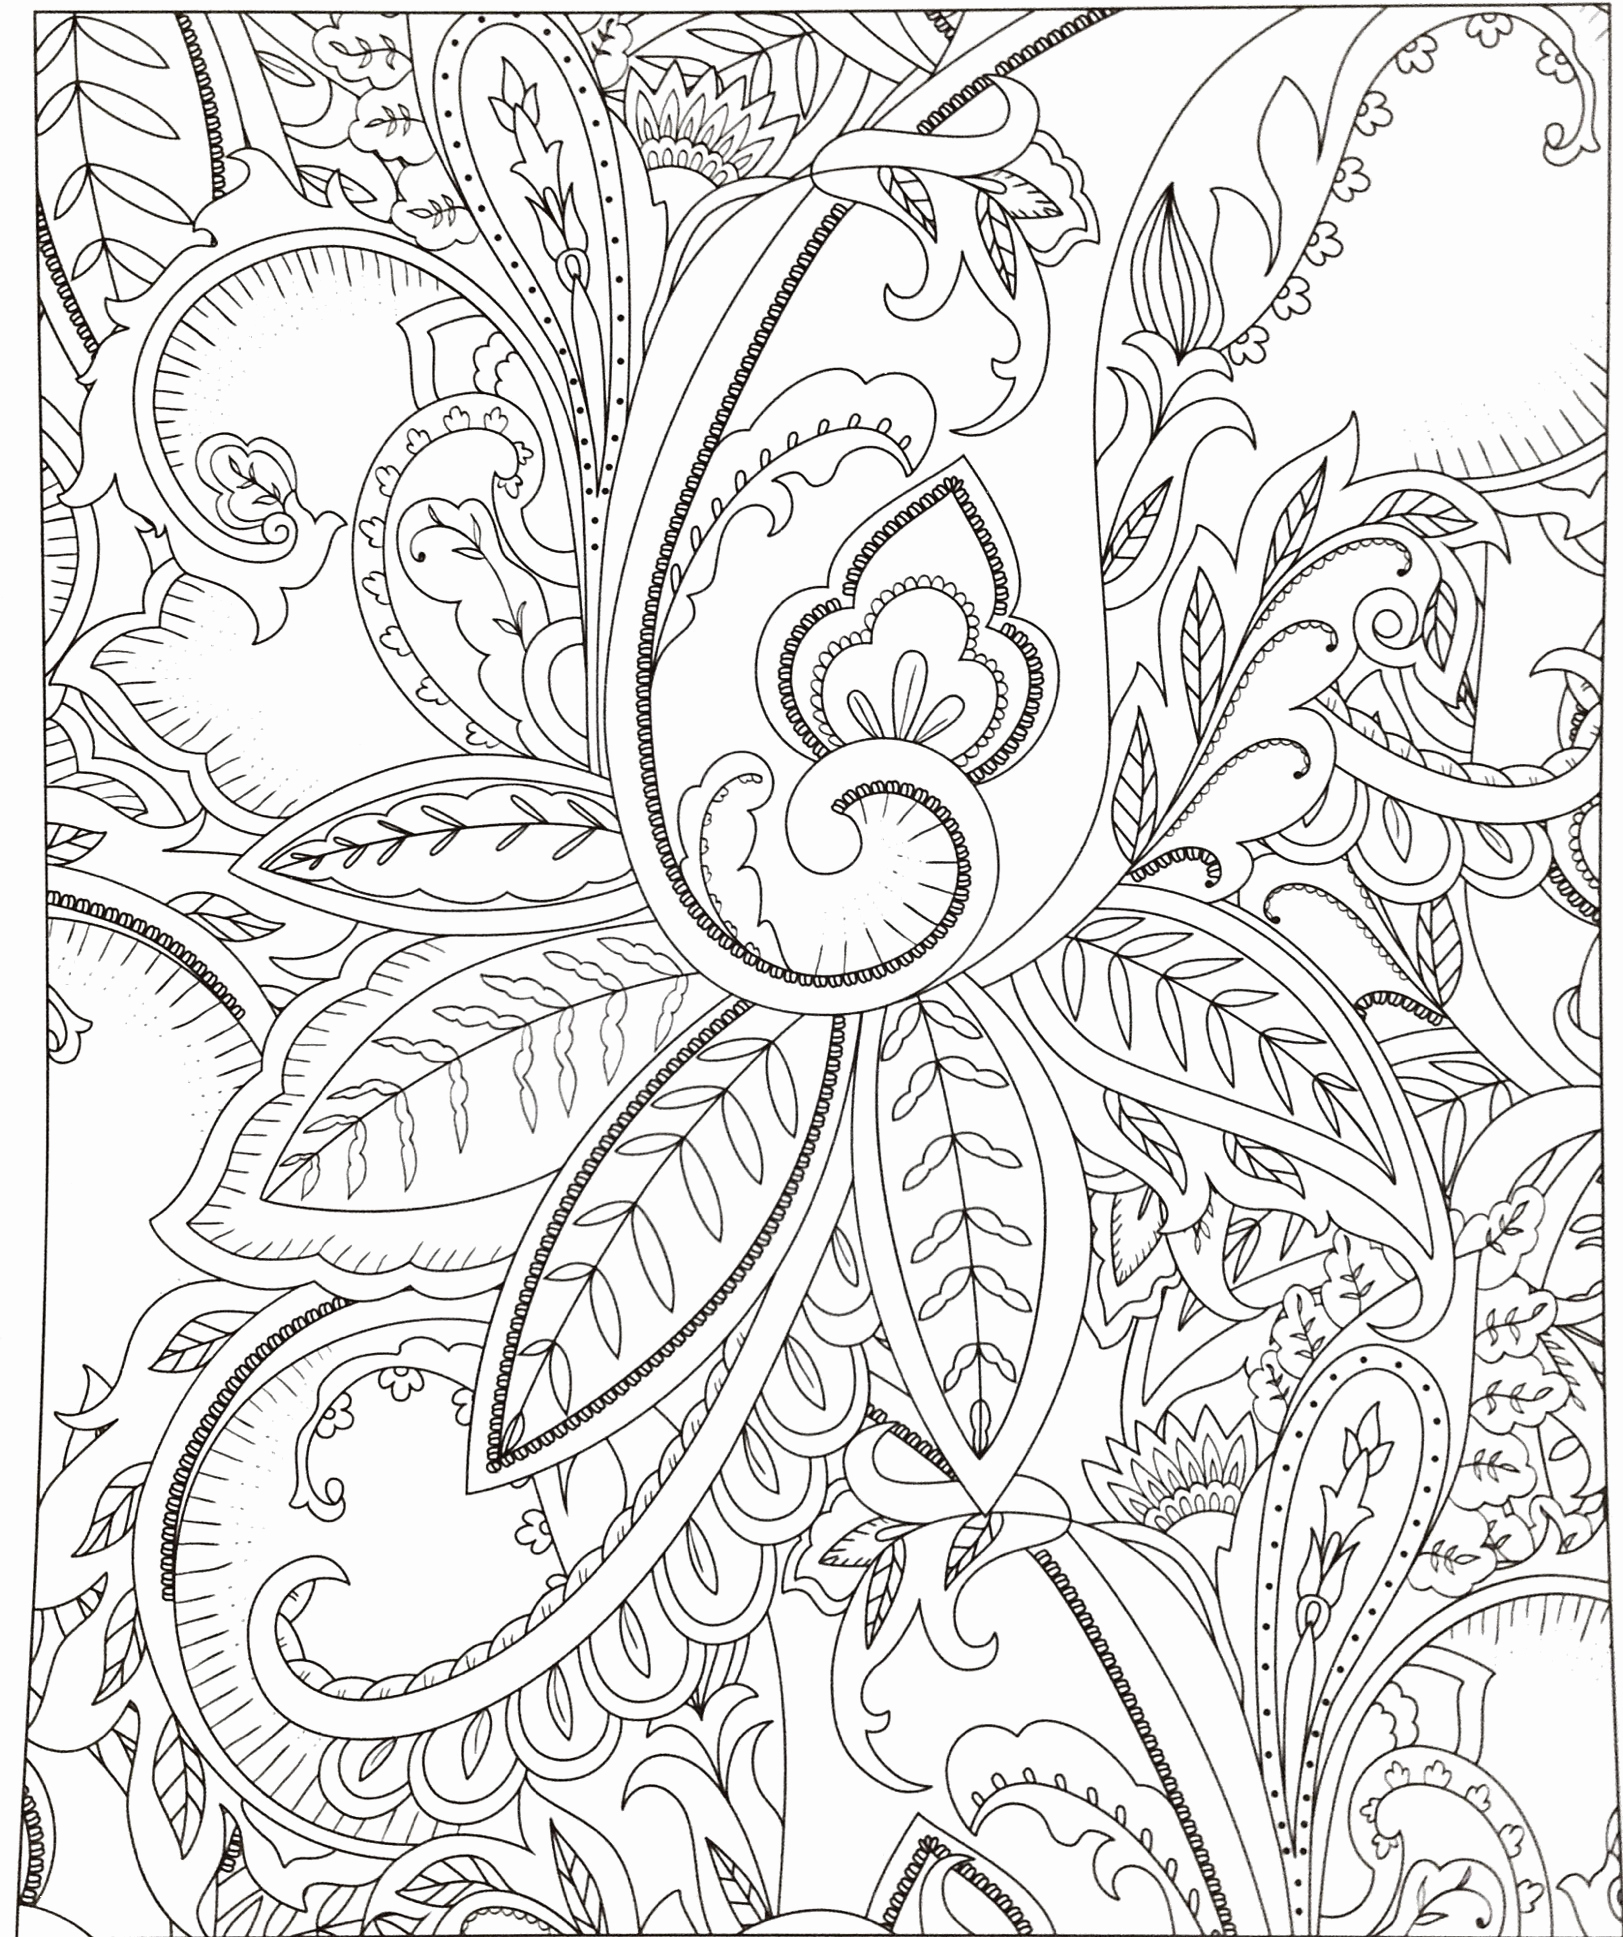 Animals In The Rainforest Coloring Pages Coloring Book Ideas Marvelous Rainforest Coloring Pages To Print